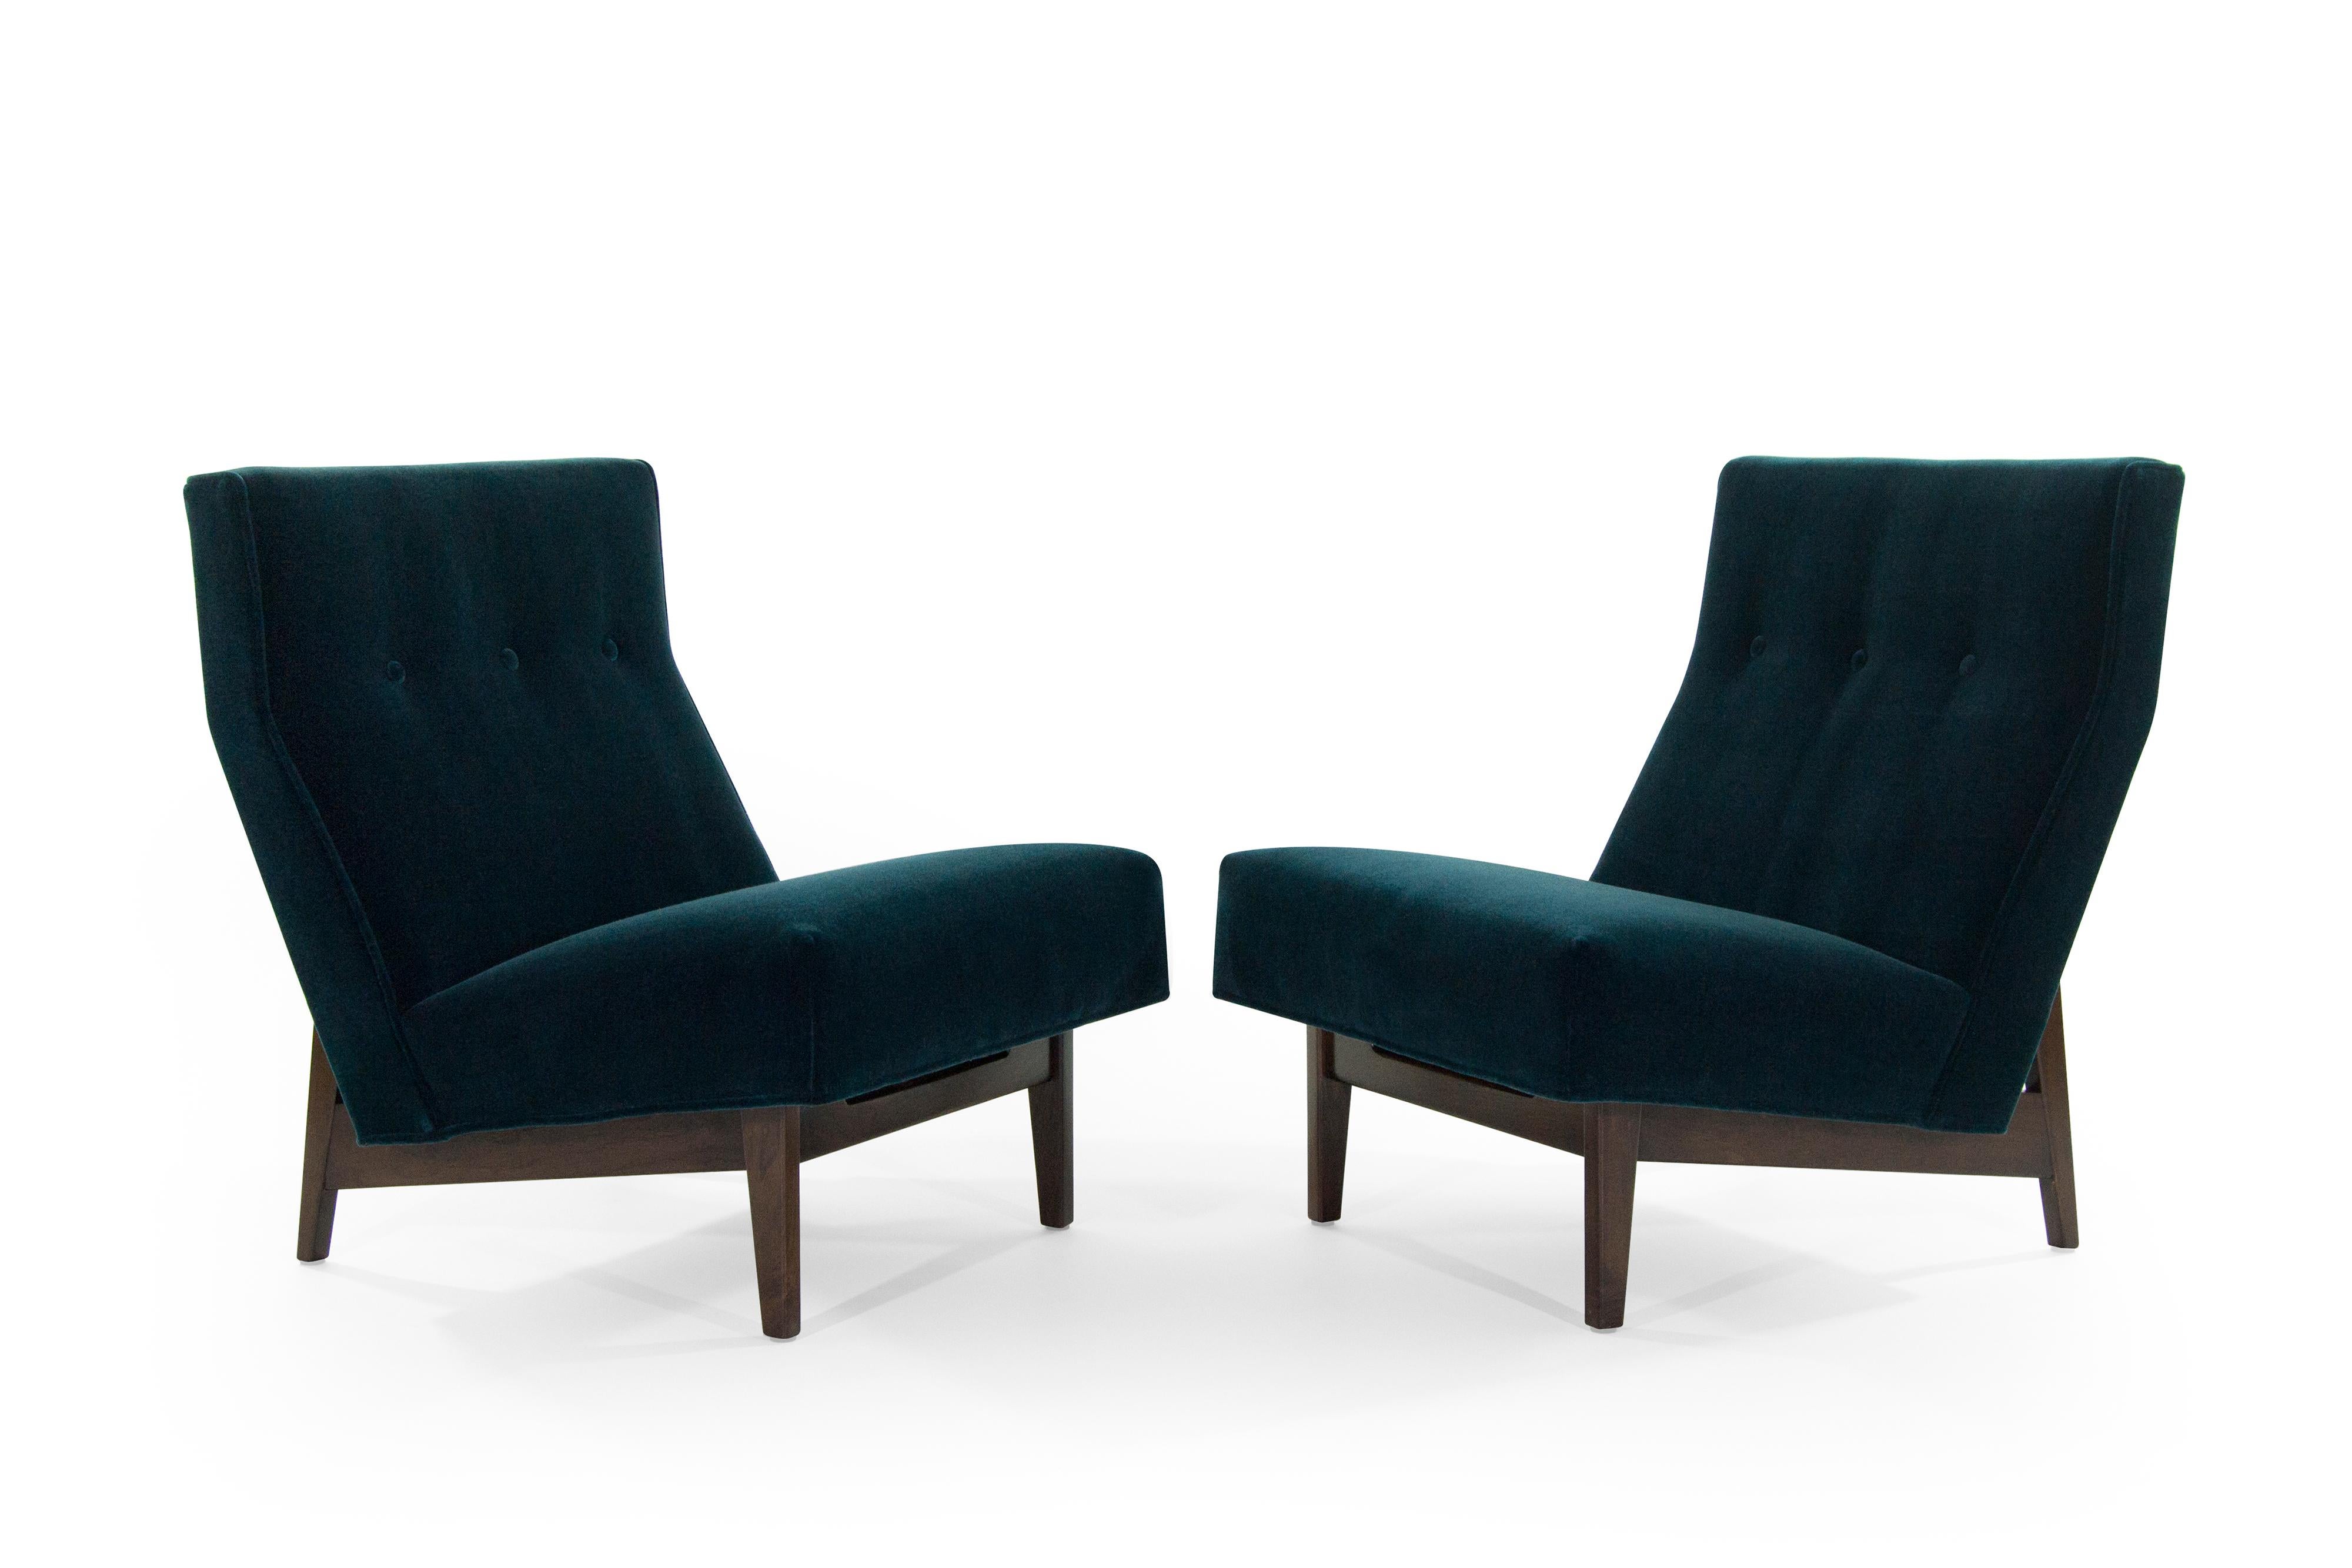 Mid-Century Modern Classic Slipper Chairs by Jens Risom in Teal Mohair, circa 1950s